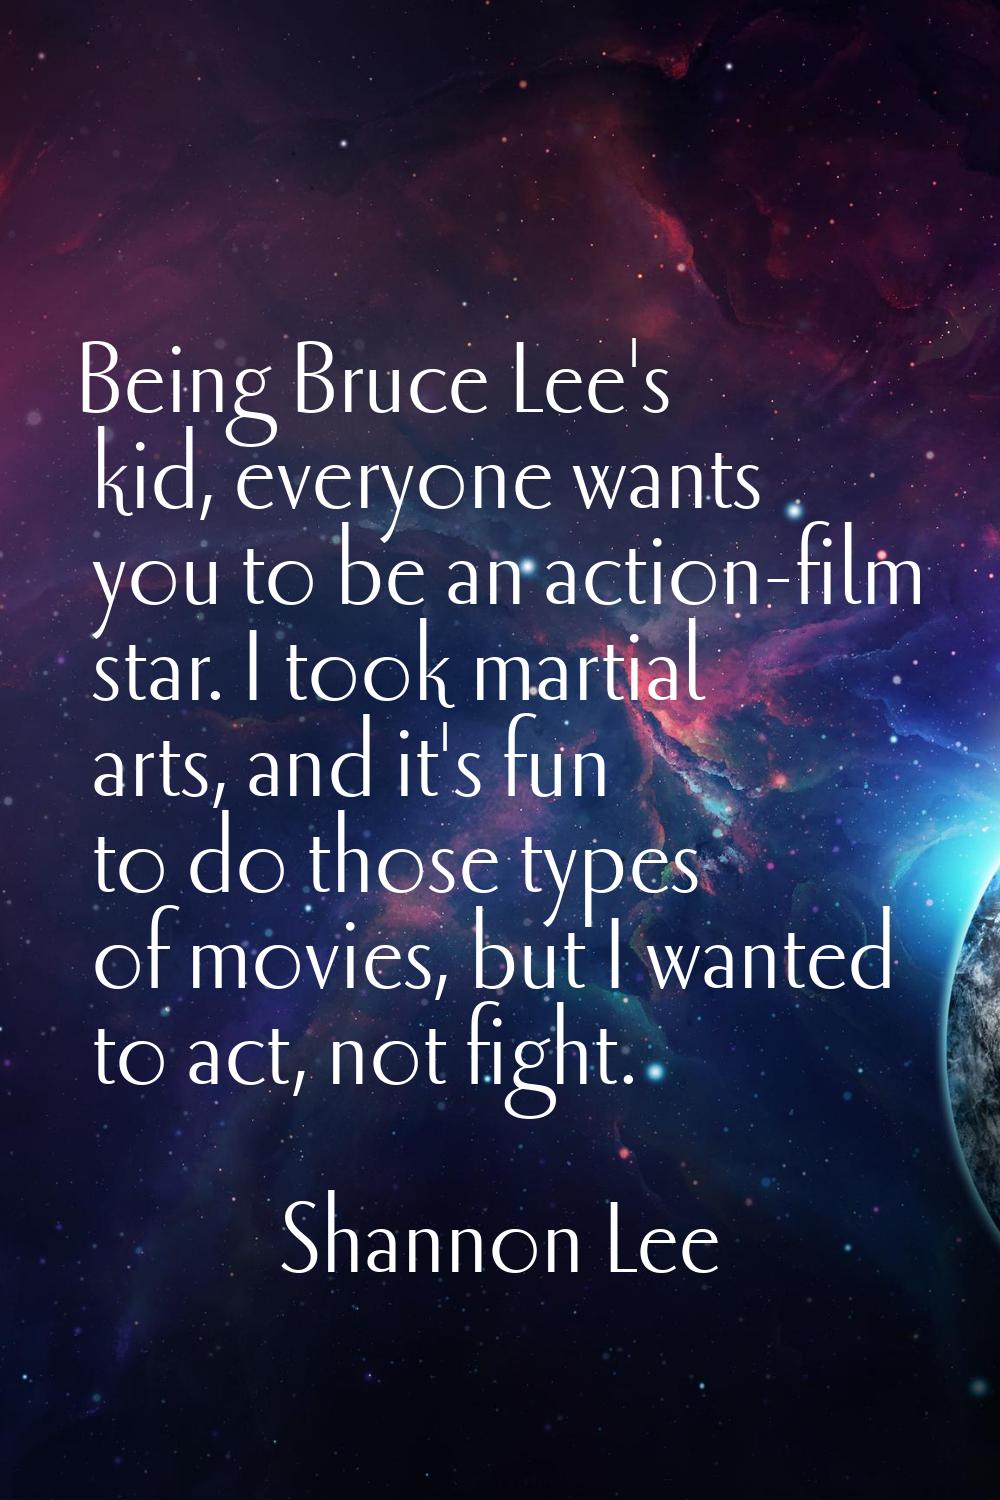 Being Bruce Lee's kid, everyone wants you to be an action-film star. I took martial arts, and it's 